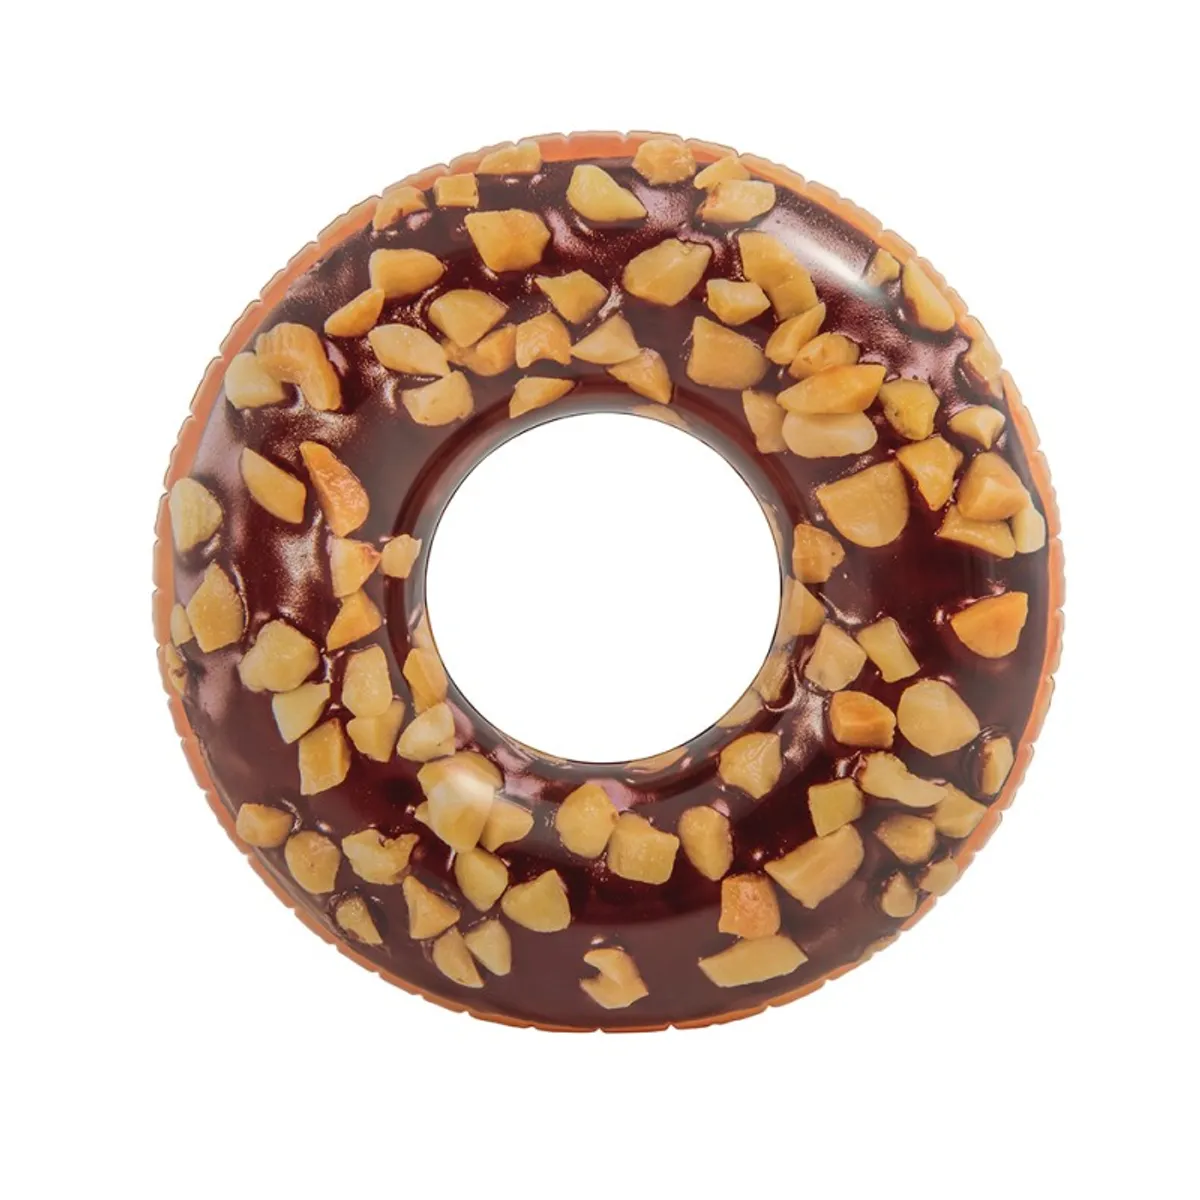 BOUEE GONFLABLE DONUT CHOCOLAT